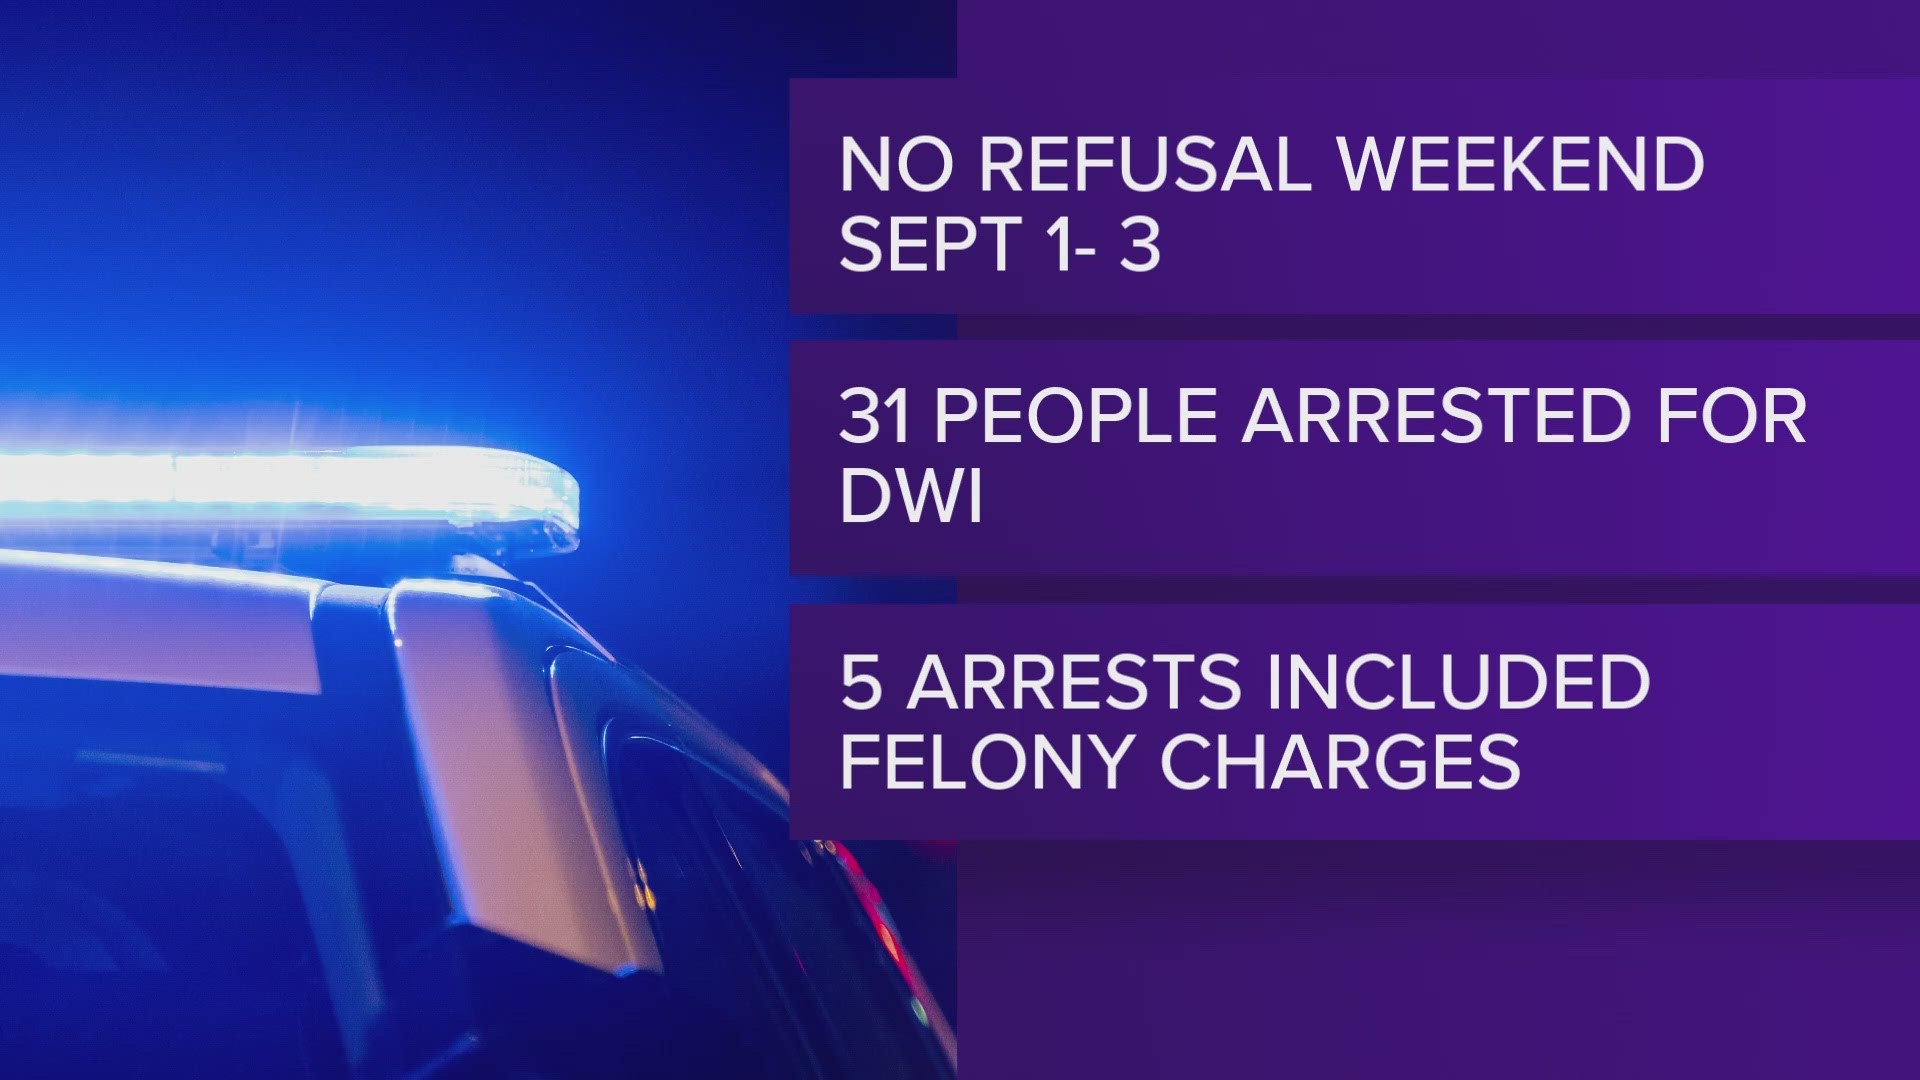 The Labor Day operation concluded with 31 DWI arrests, including 5 felony charges.